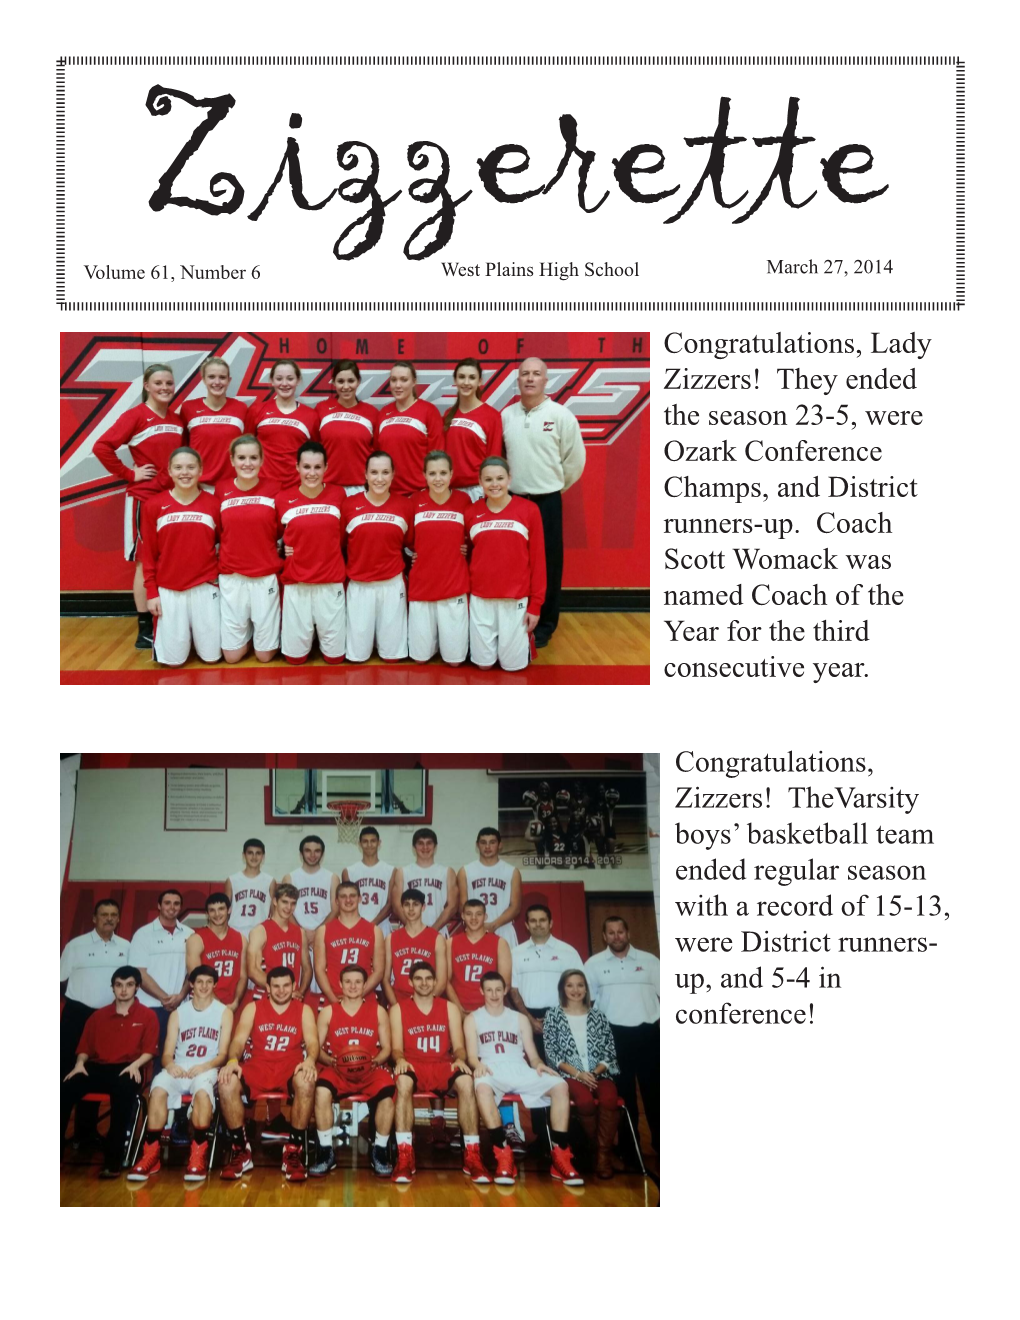 Congratulations, Lady Zizzers! They Ended the Season 23-5, Were Ozark Conference Champs, and District Runners-Up